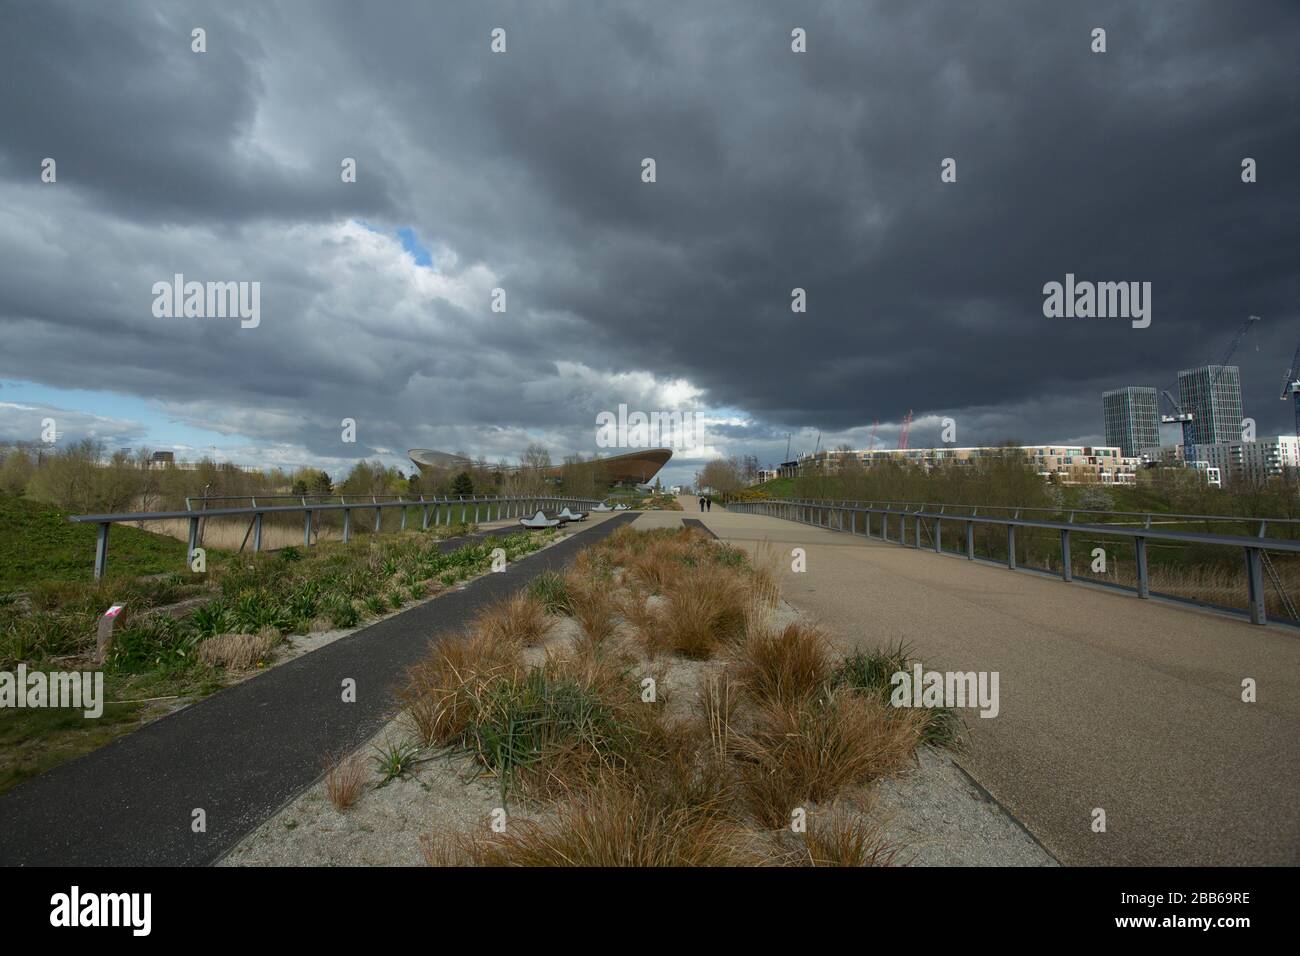 London, UK. 30th Mar, 2020. During the coronavirus in UK lockdown, empty Queen Elizabeth Olympic Park. Today Tokyo Olympics and Paralympics, new dates have been confirmed for 2021. Credit: Marcin Nowak/Alamy Live News Stock Photo